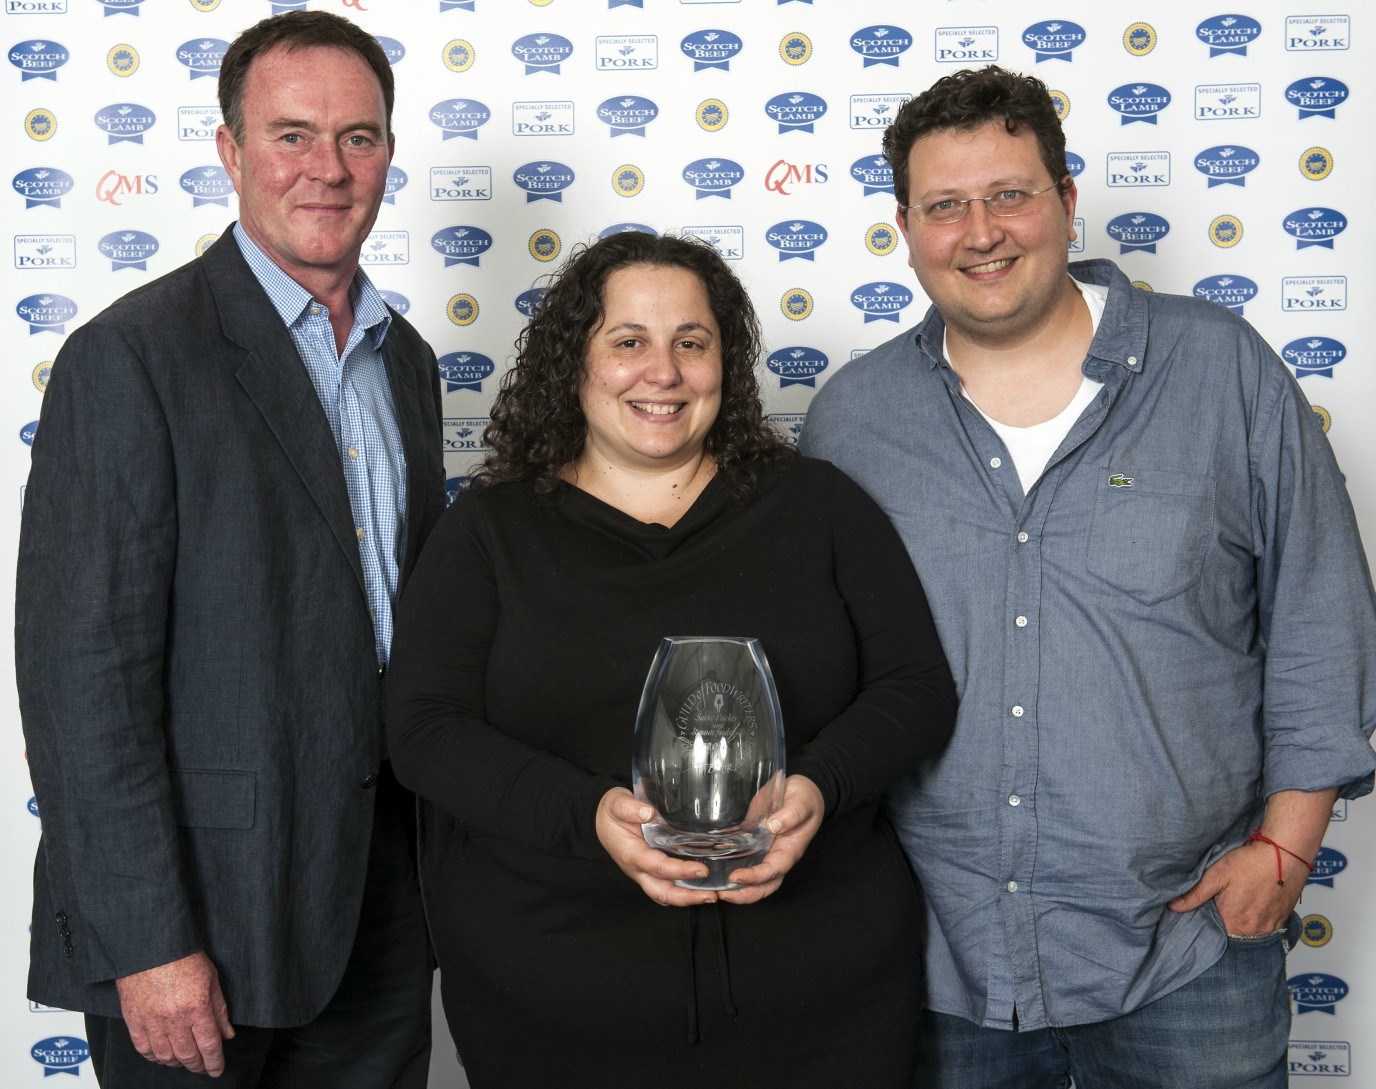 From left to right: Sam Fairs of hillfarm oils, Sarit Packer and Itamar Srulovich